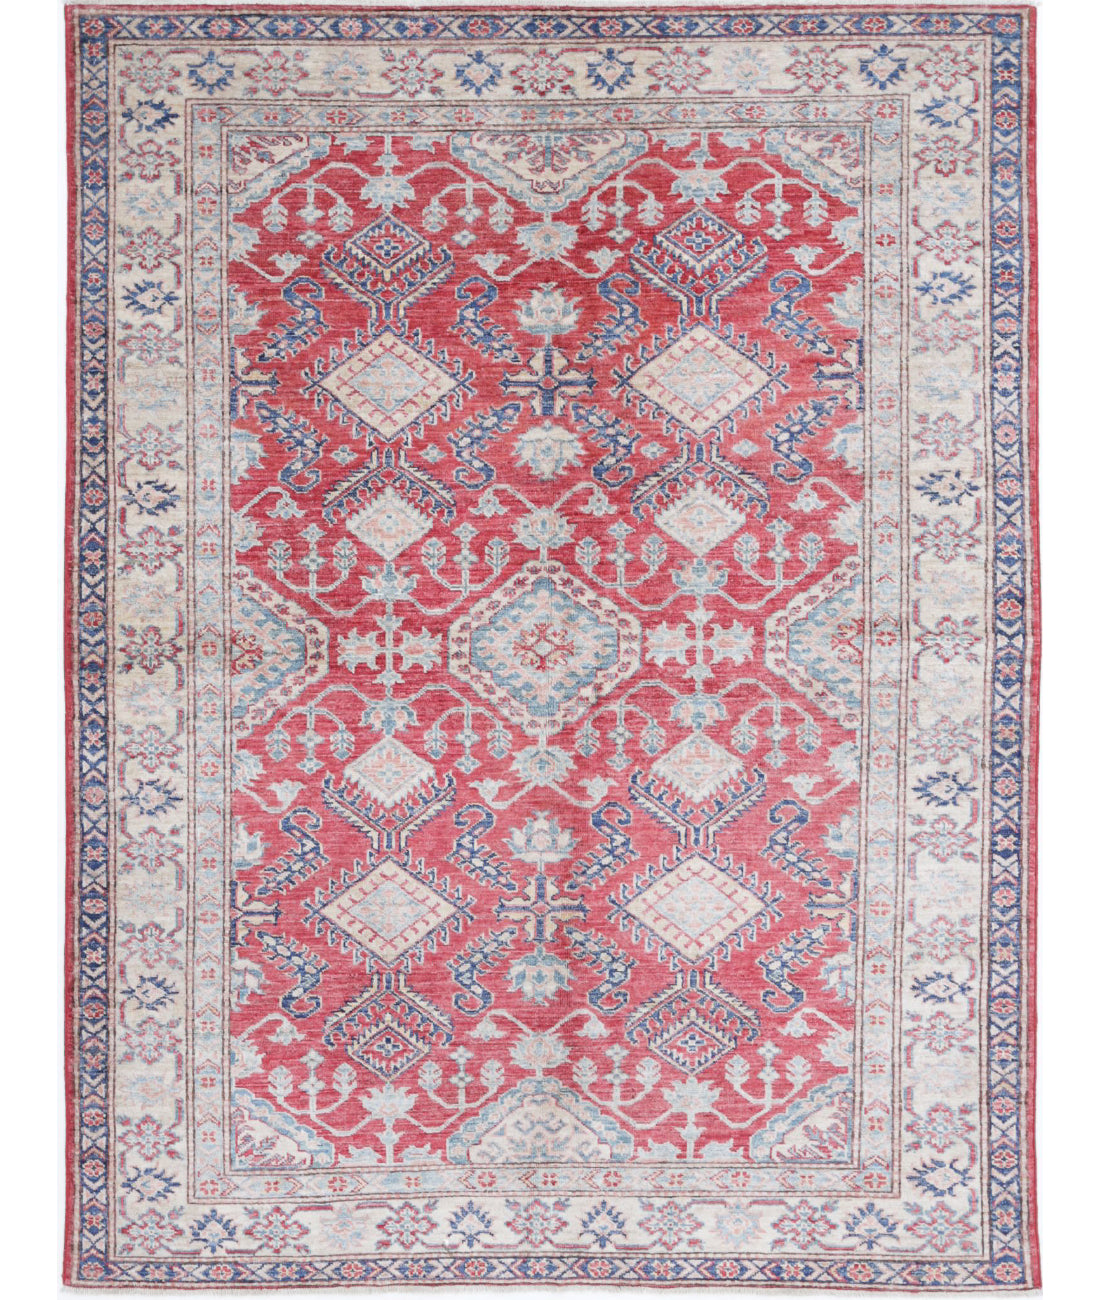 Hand Knotted Royal Kazak Wool Rug - 4'10'' x 6'6'' 4'10'' x 6'6'' (145 X 195) / Red / Ivory